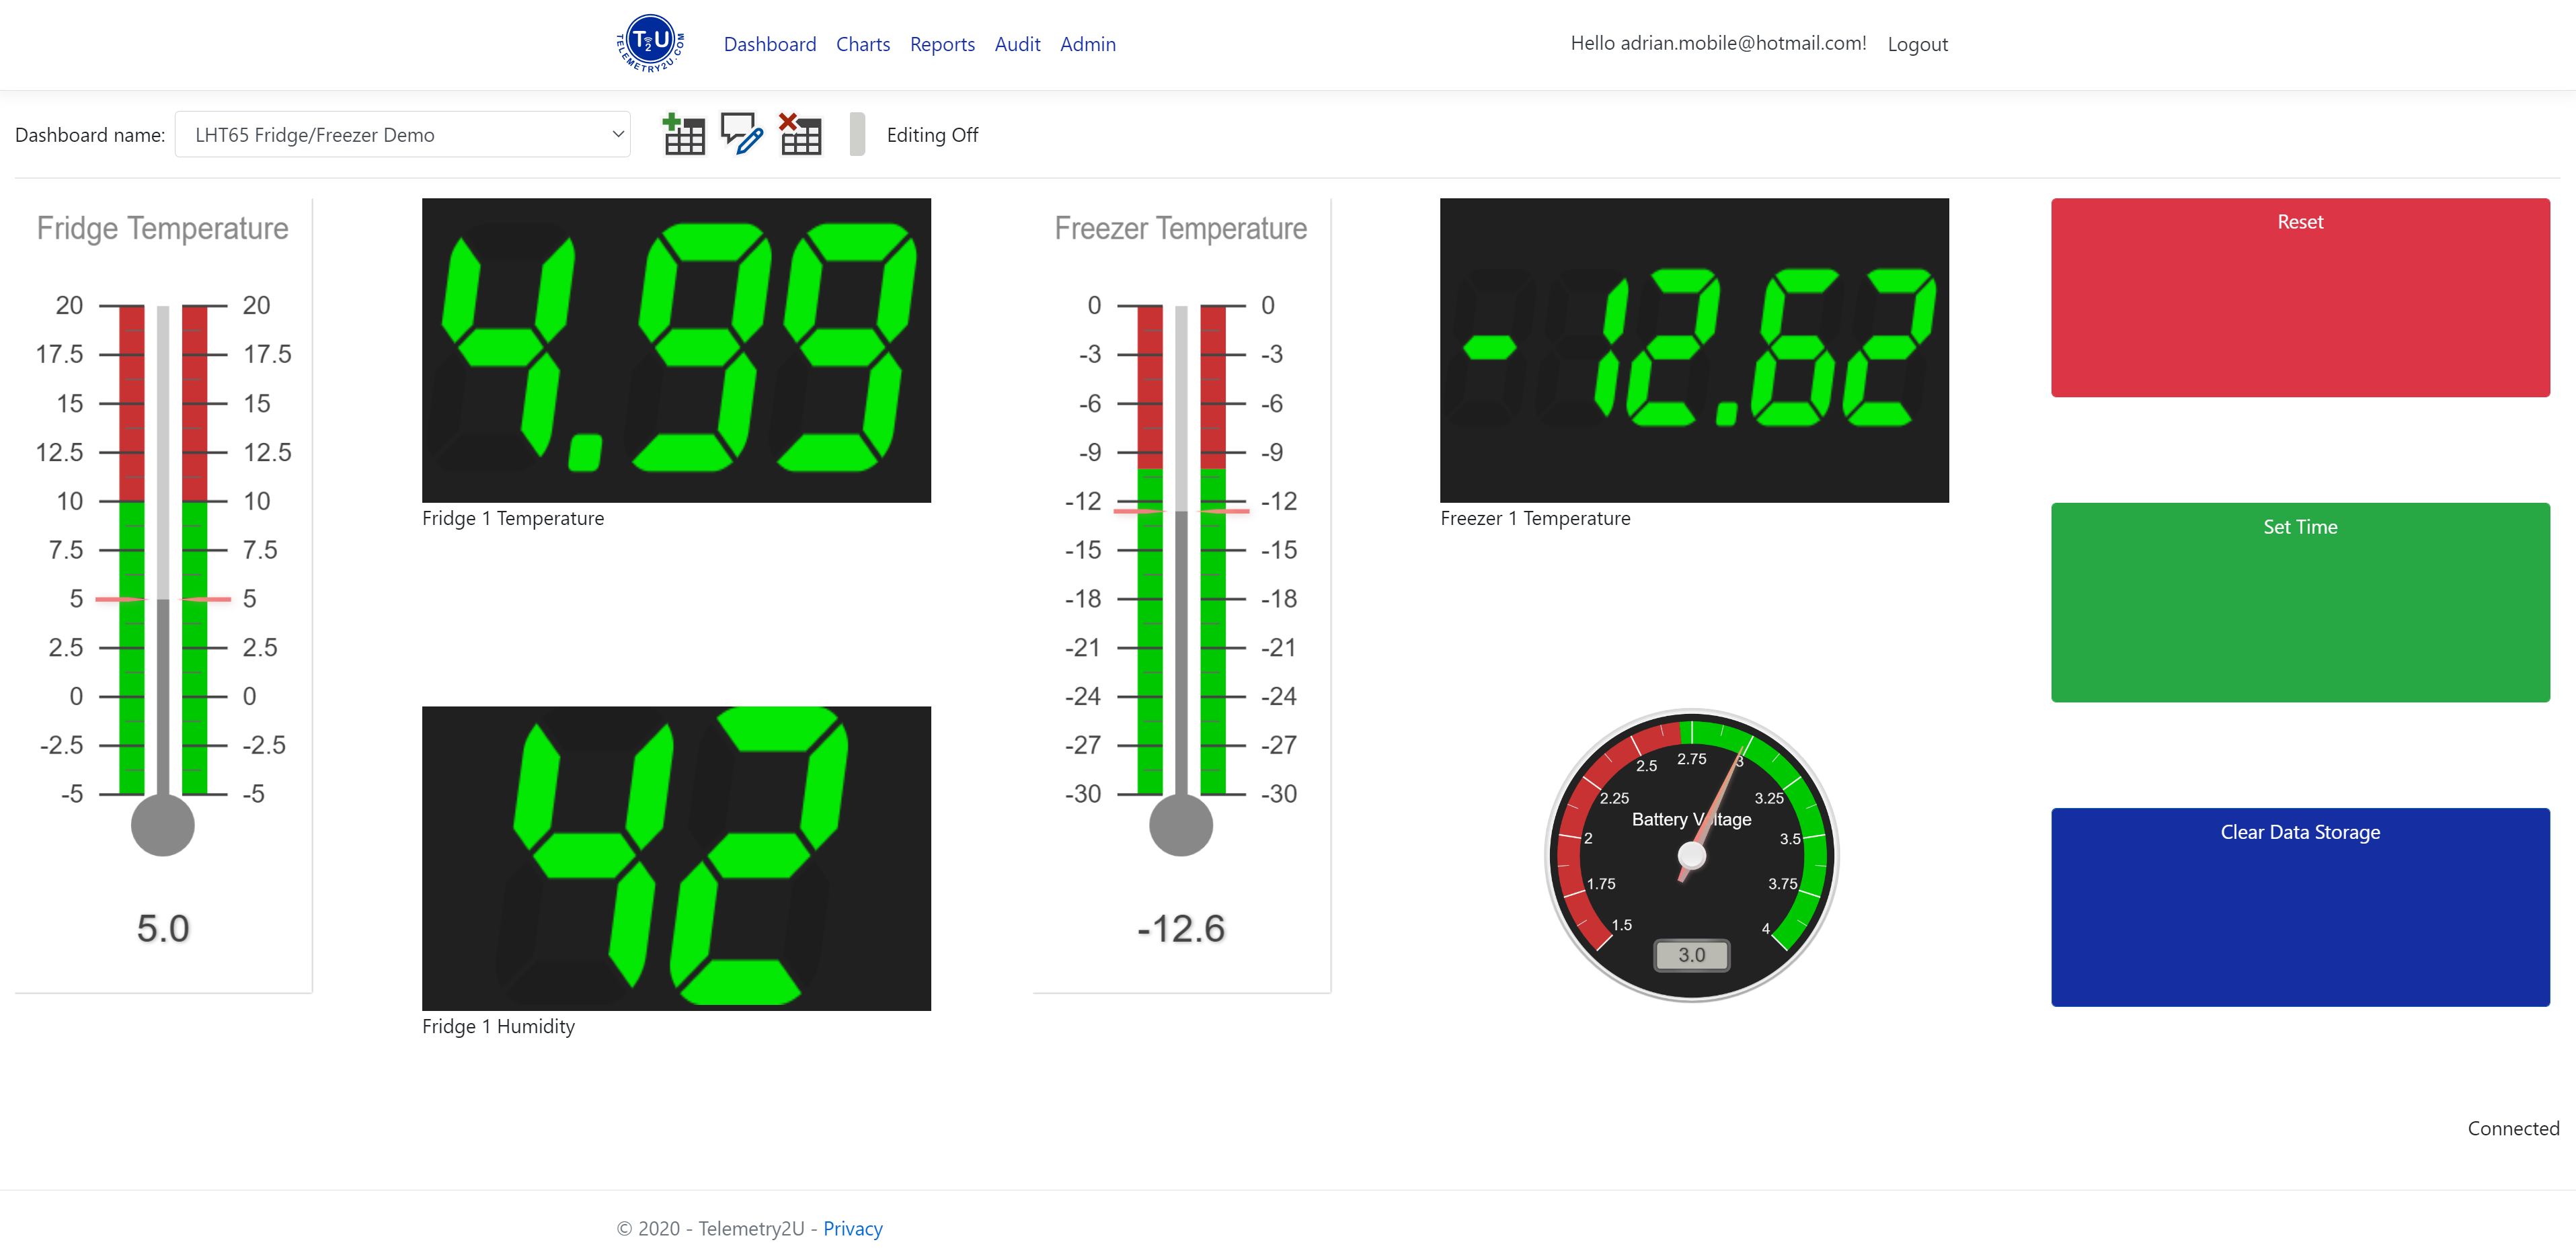 2.1 - Viewing Dashboards